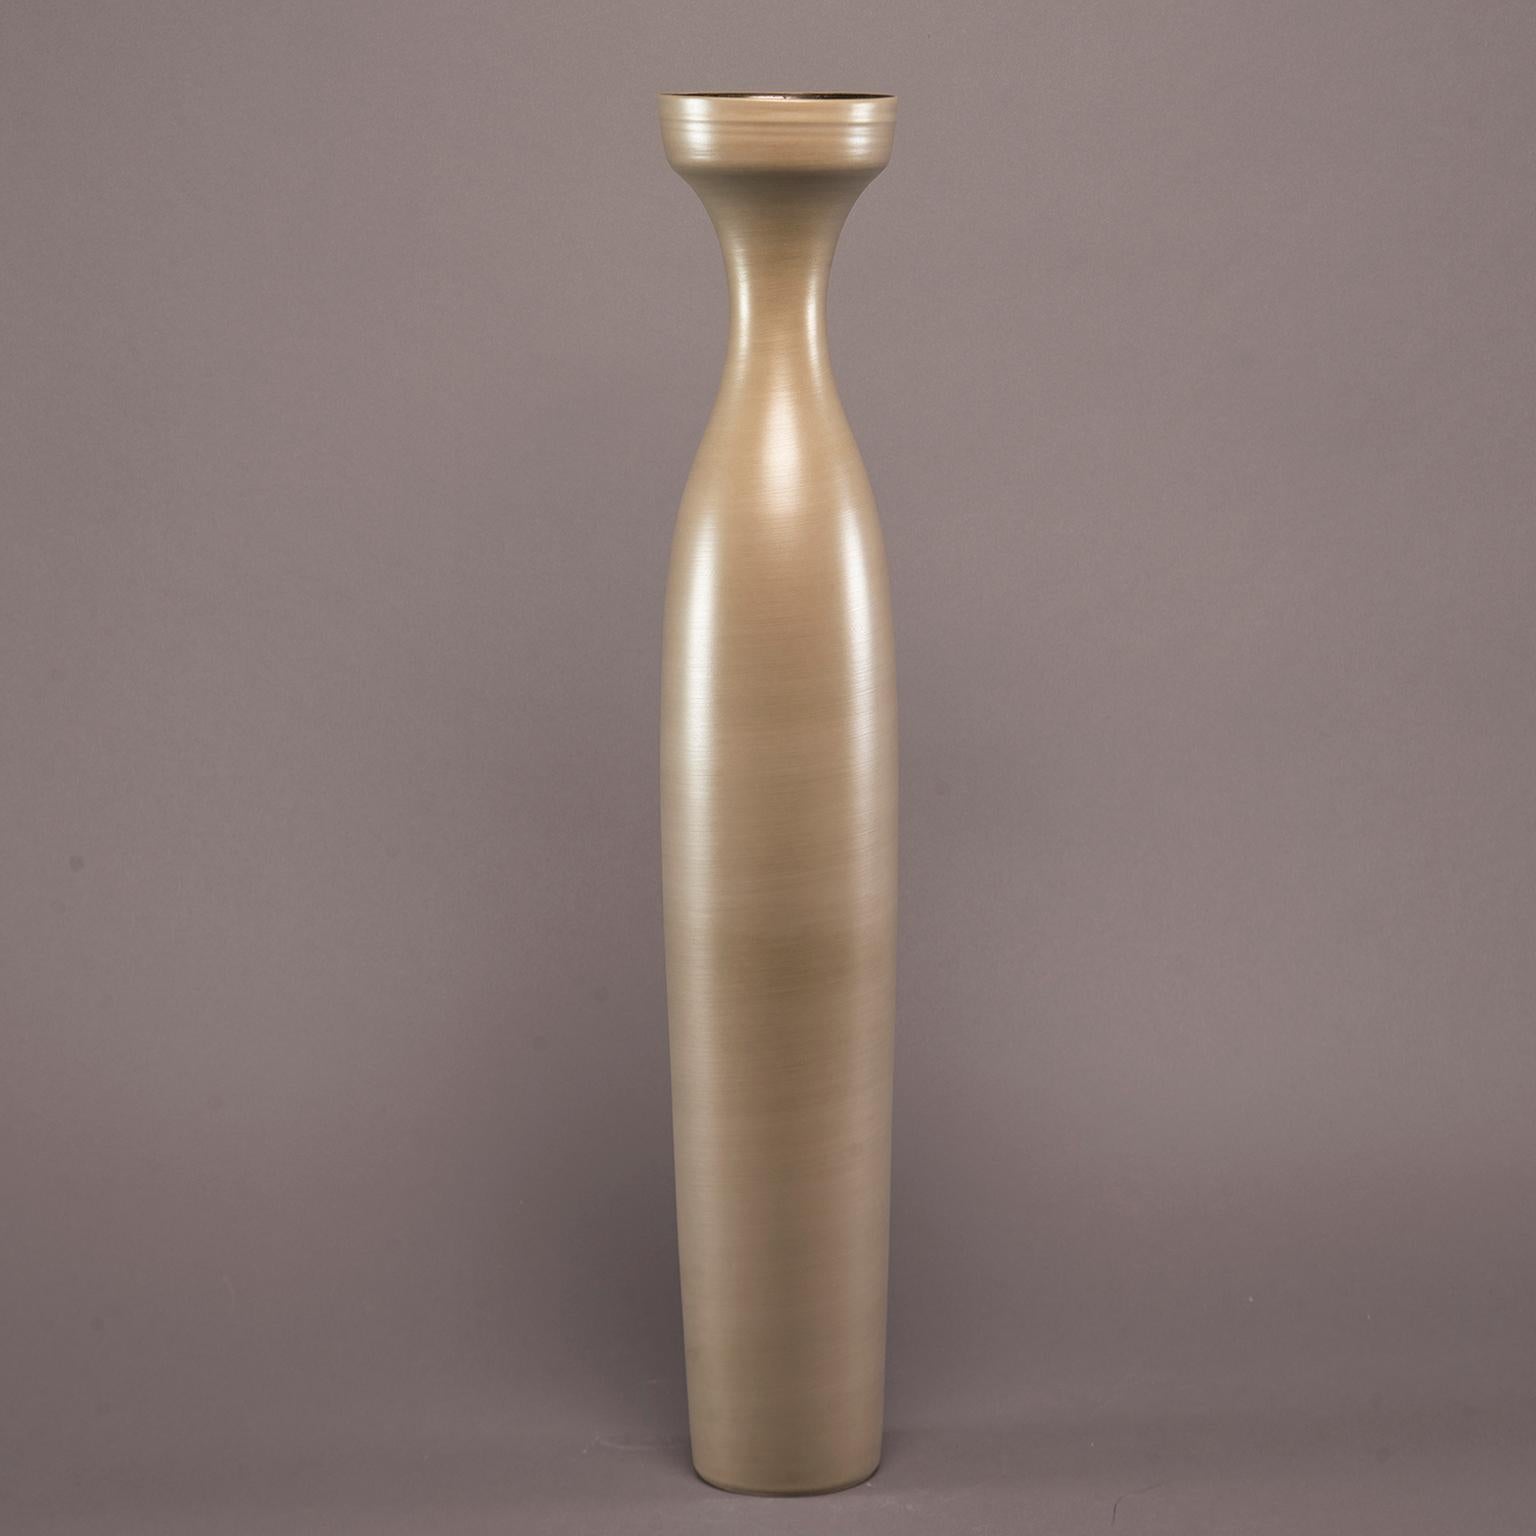 Contemporary Italian ceramic vase by Rina Menardi is just under 30” tall and has a slender shape with flared neck, dark matte internal wash and contrasting taupe outer glaze. New.